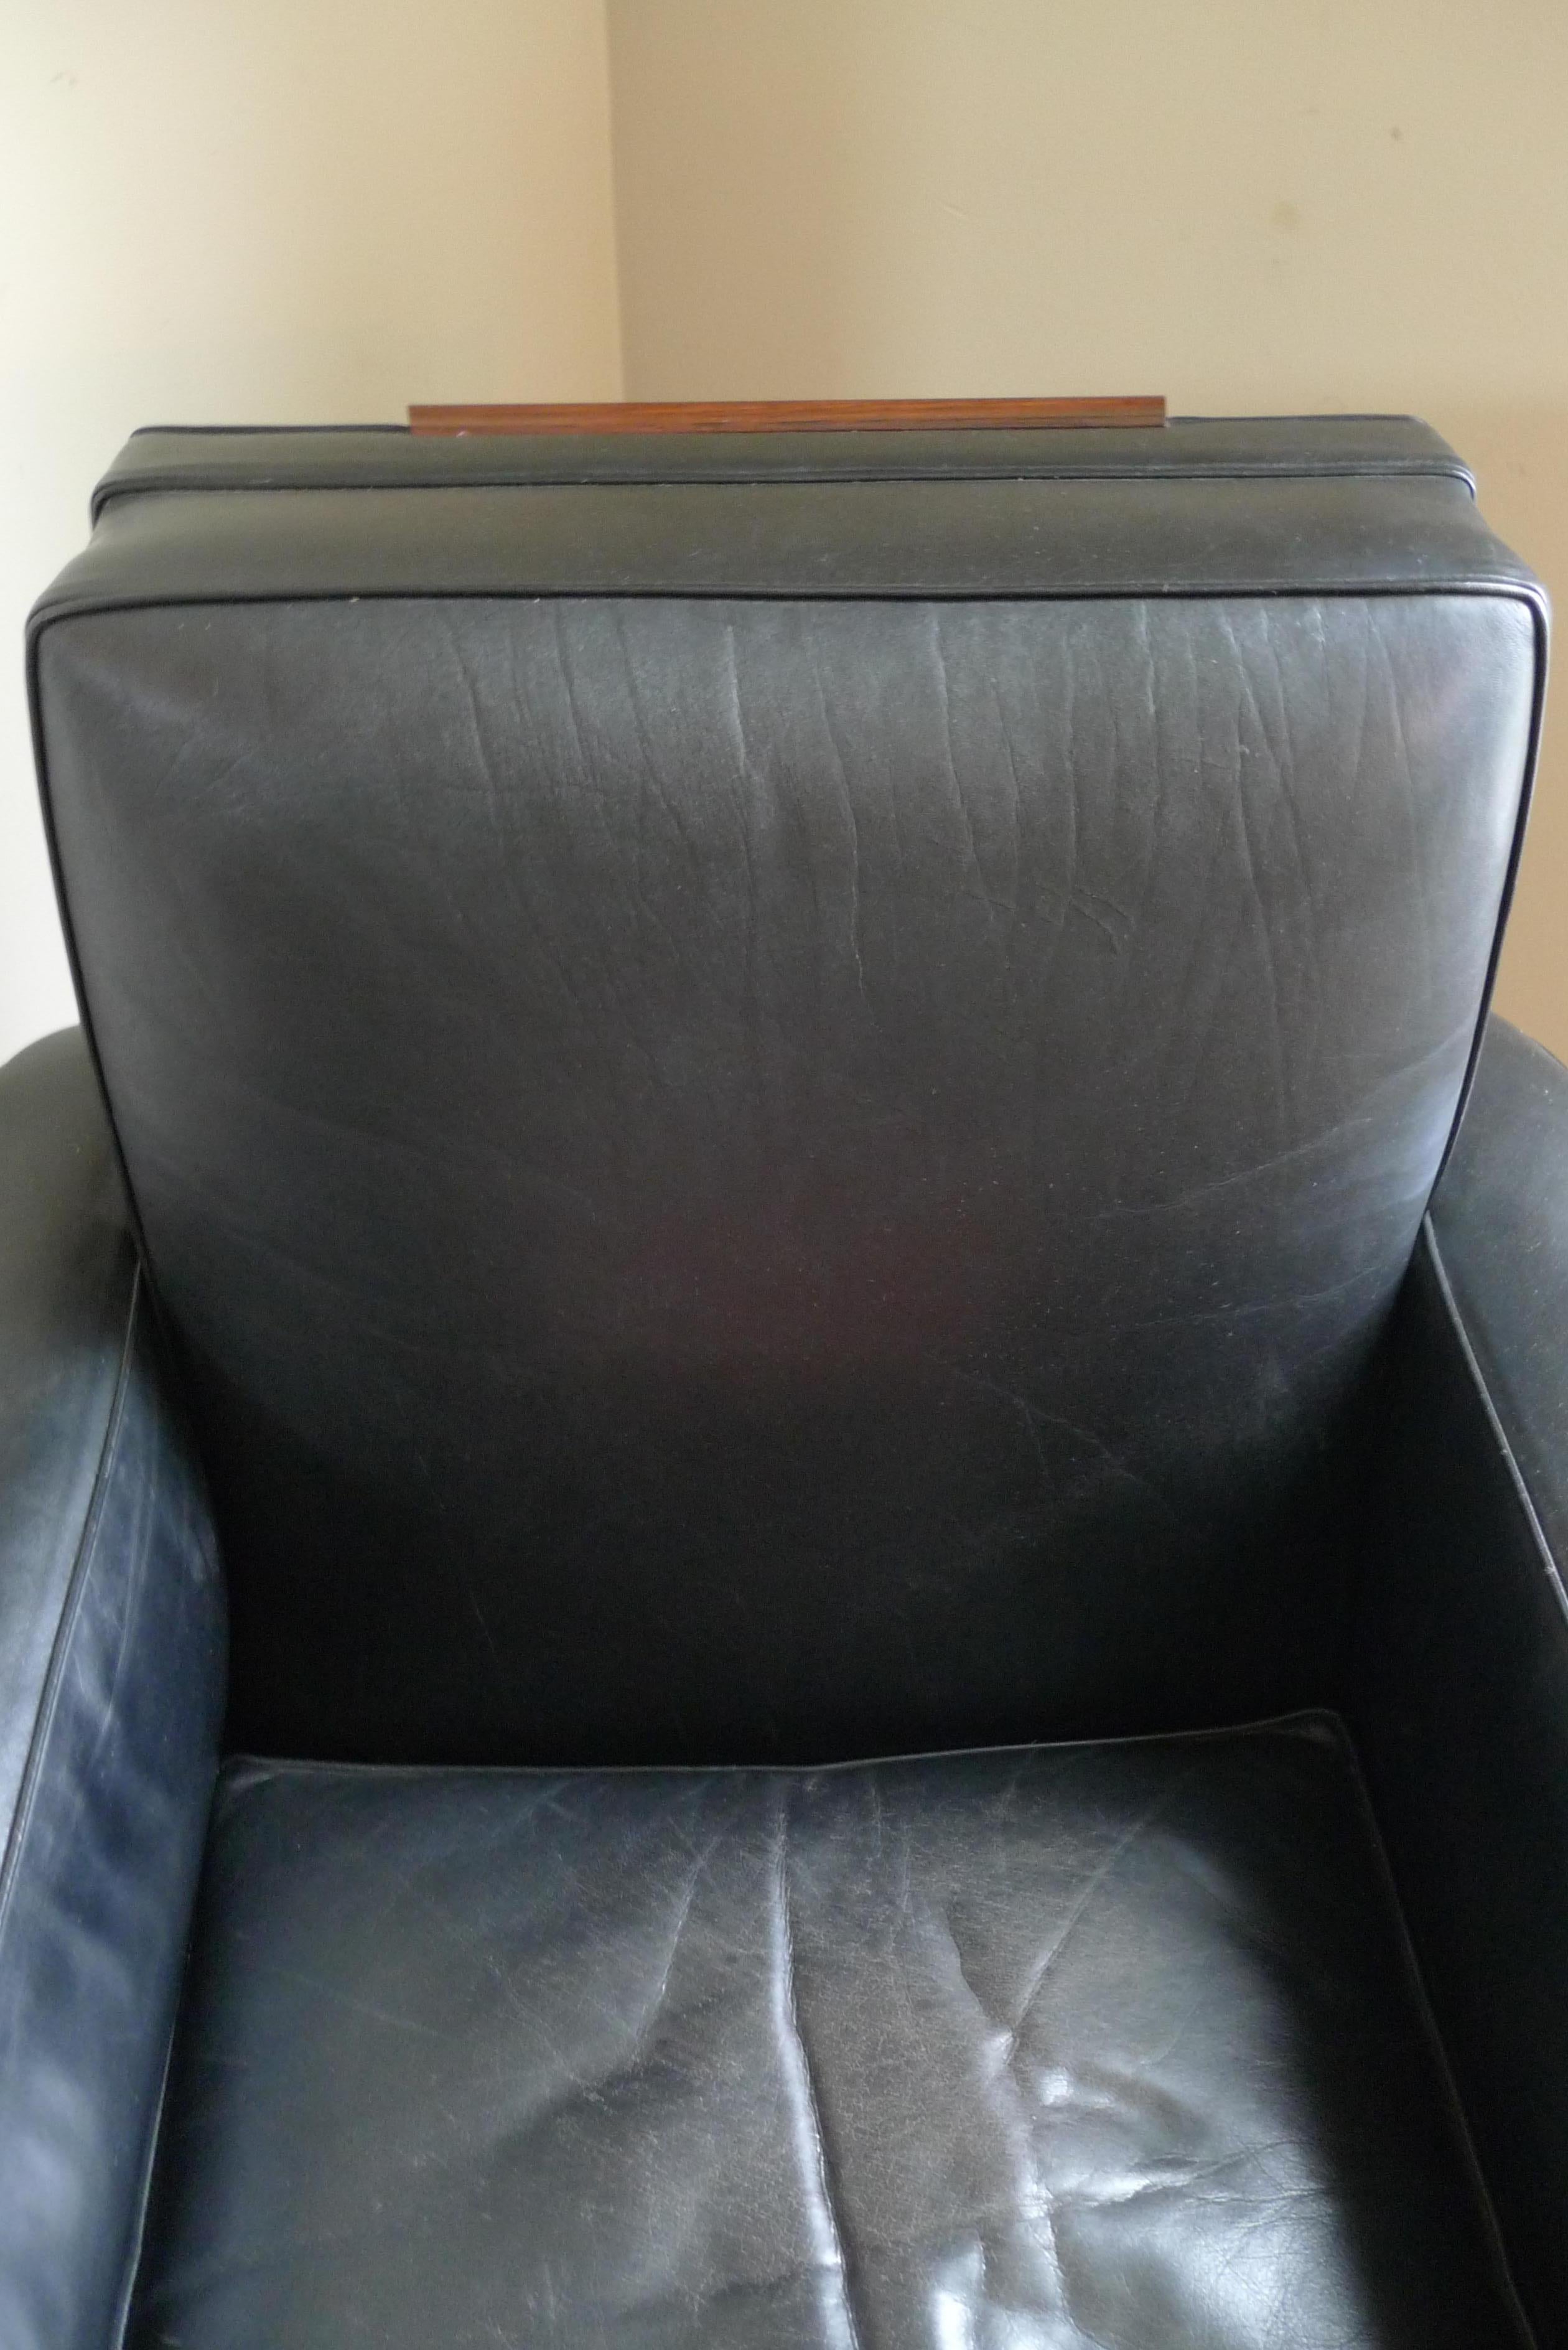 Club Lounge Chair, 1960s France, Black Leather. Manner of Emile-Jacques Ruhlmann 1